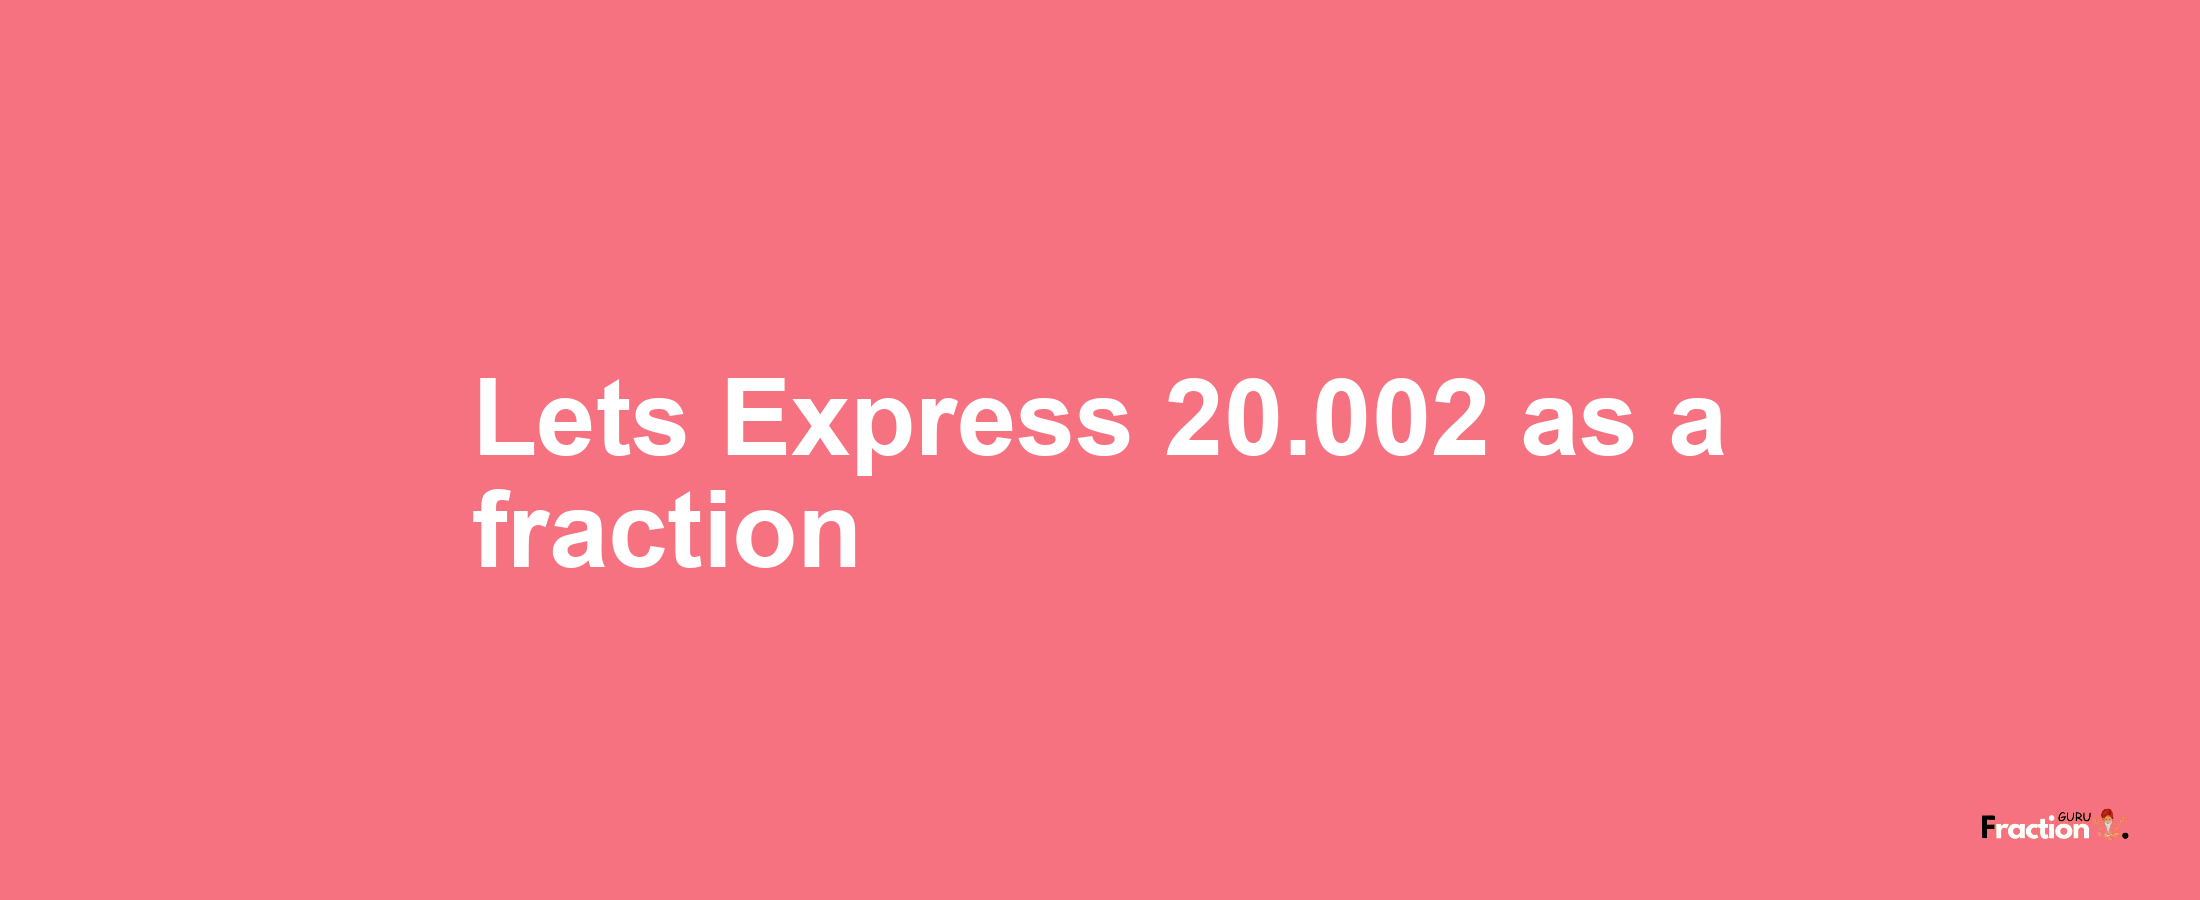 Lets Express 20.002 as afraction